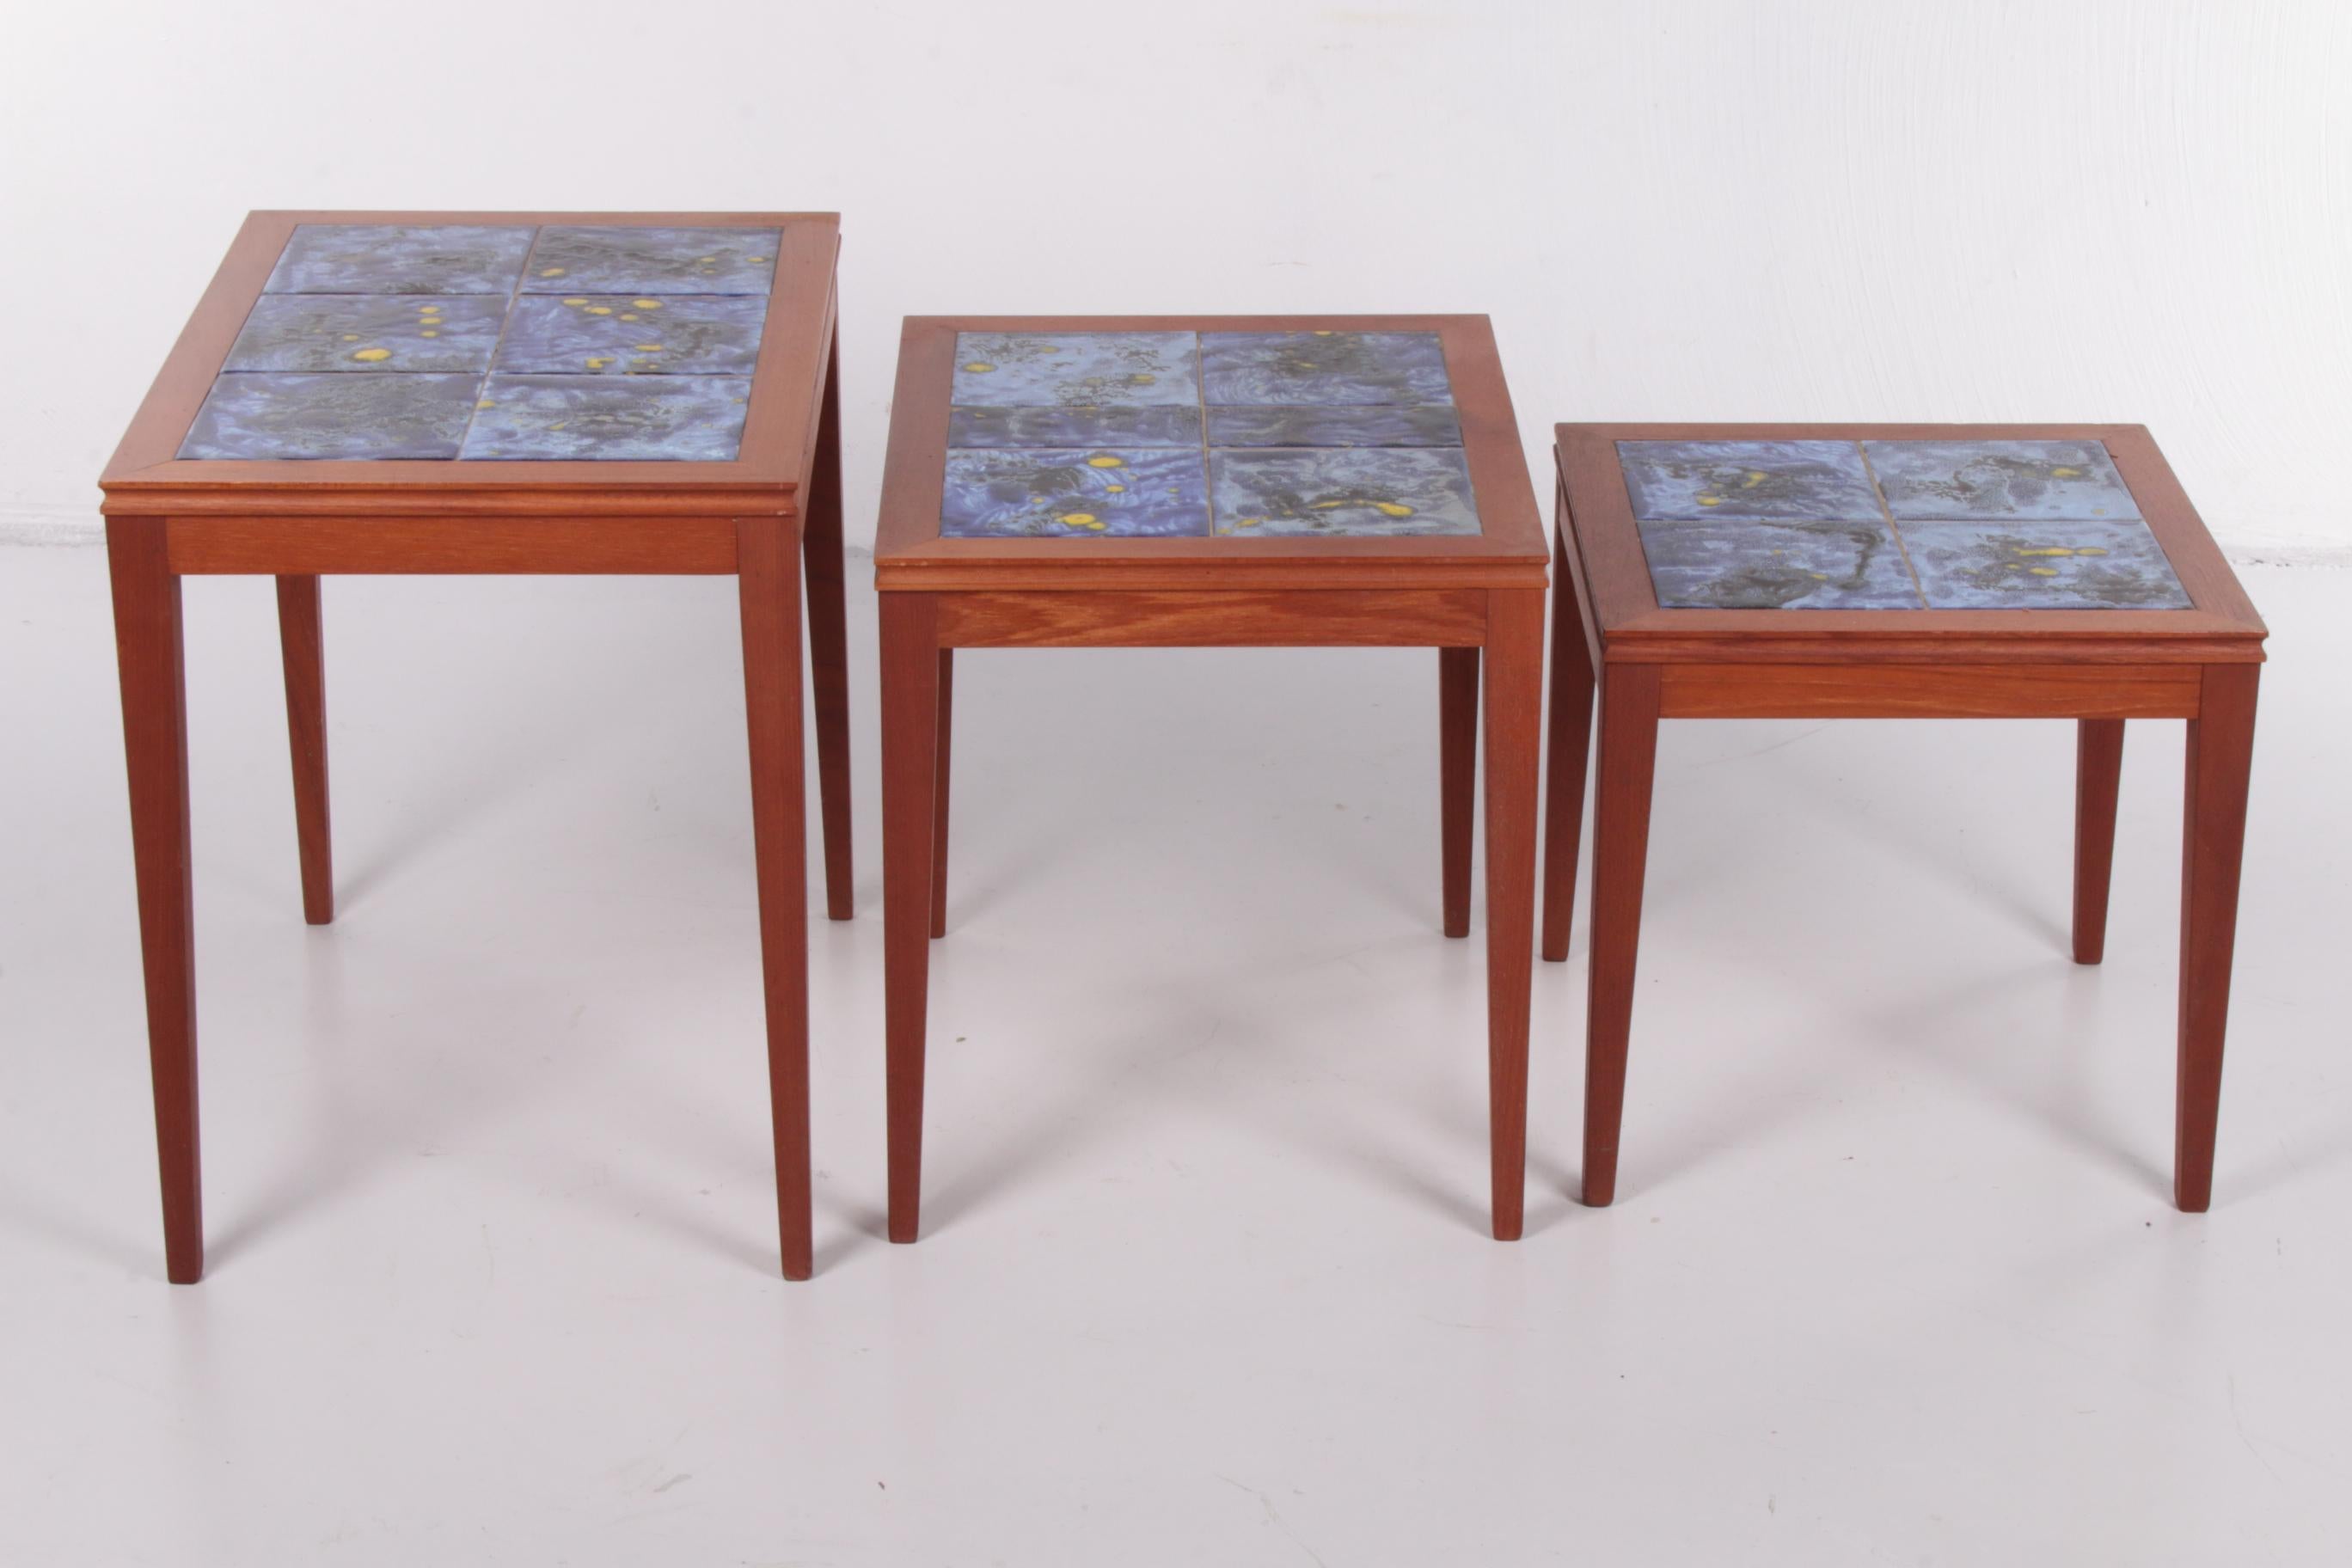 Ceramic Vintage Set of Side Tables with Beautiful Blue Tiles 60s, Denmark For Sale